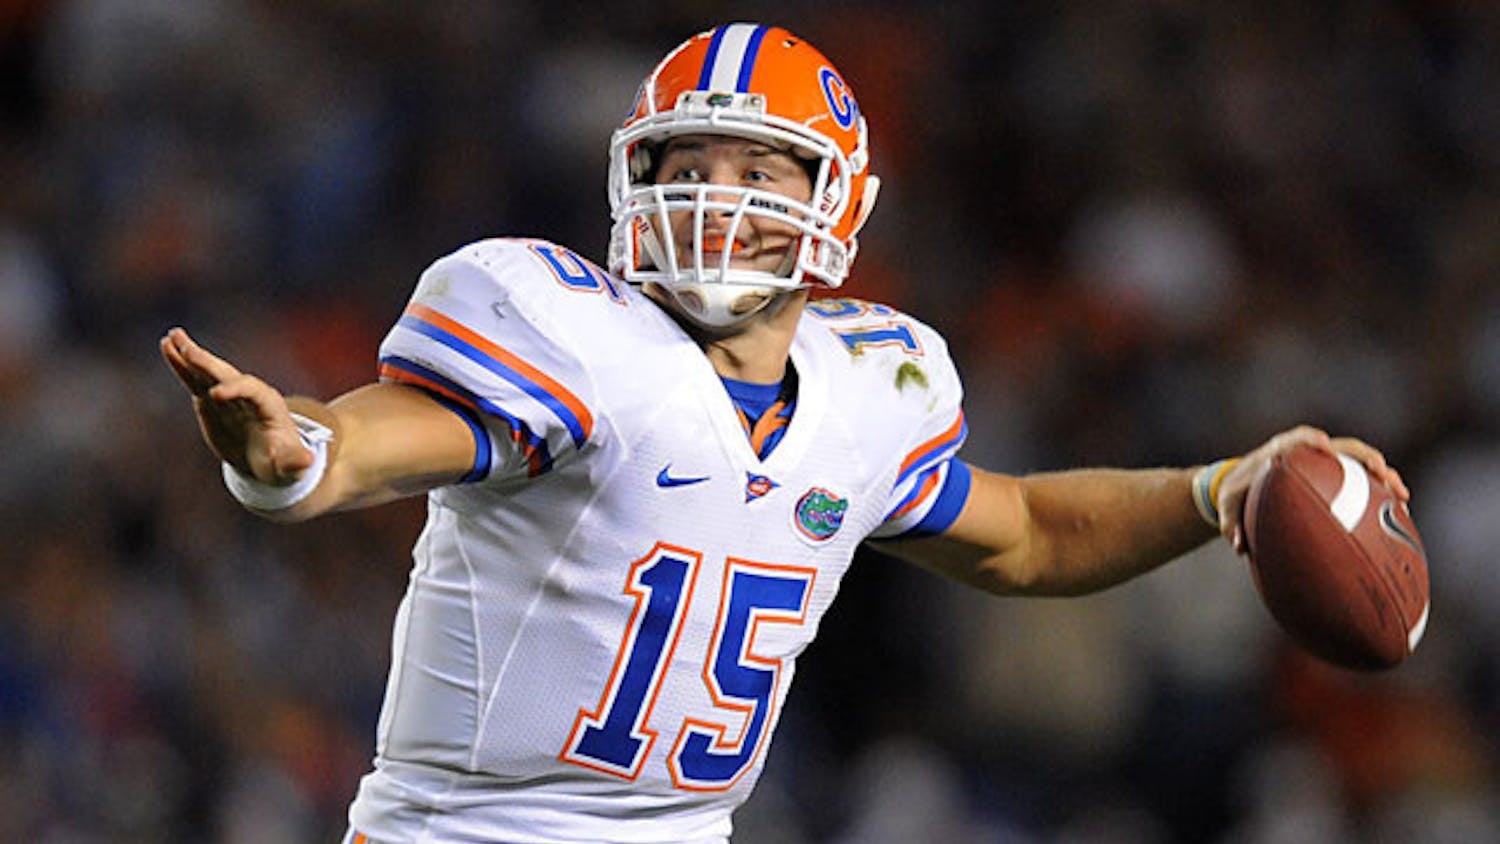 Former Florida quarterback Tim Tebow was listed on the College Football Hall of Fame ballot Monday.